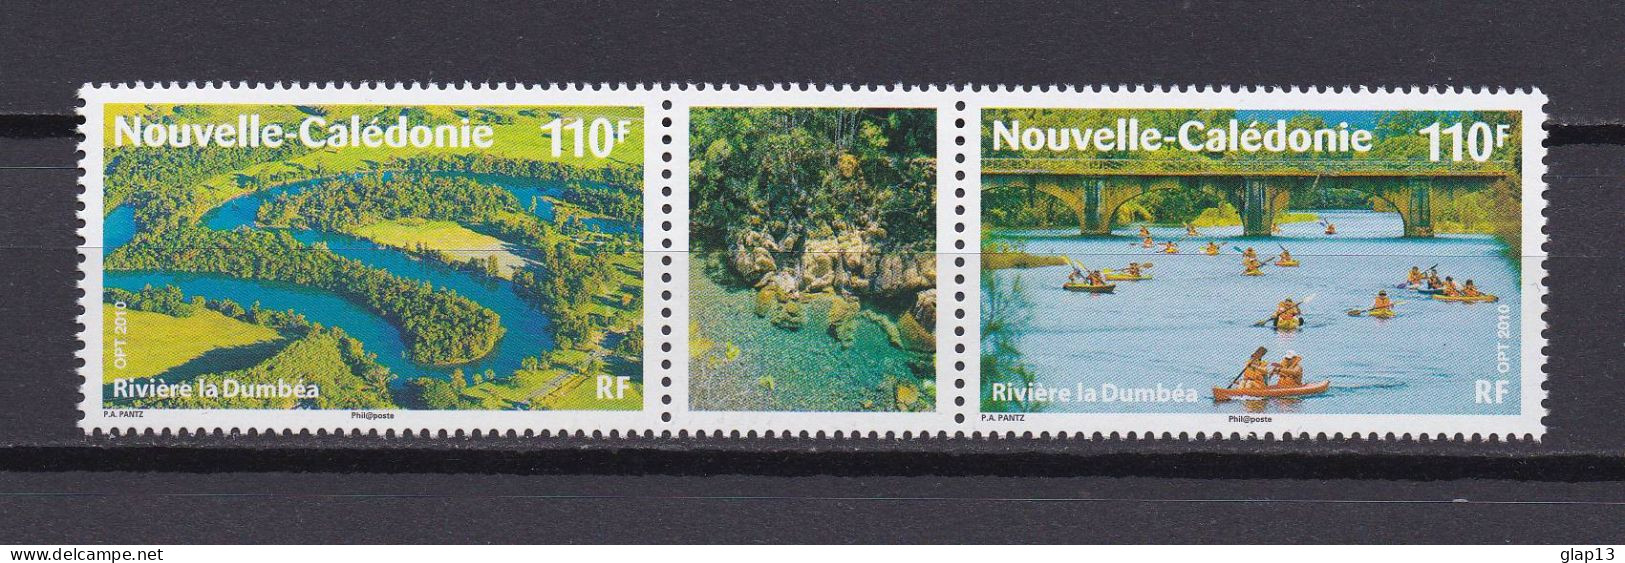 NOUVELLE-CALEDONIE 2010 TIMBRE N°1094/95 NEUF** PAYSAGE - Neufs